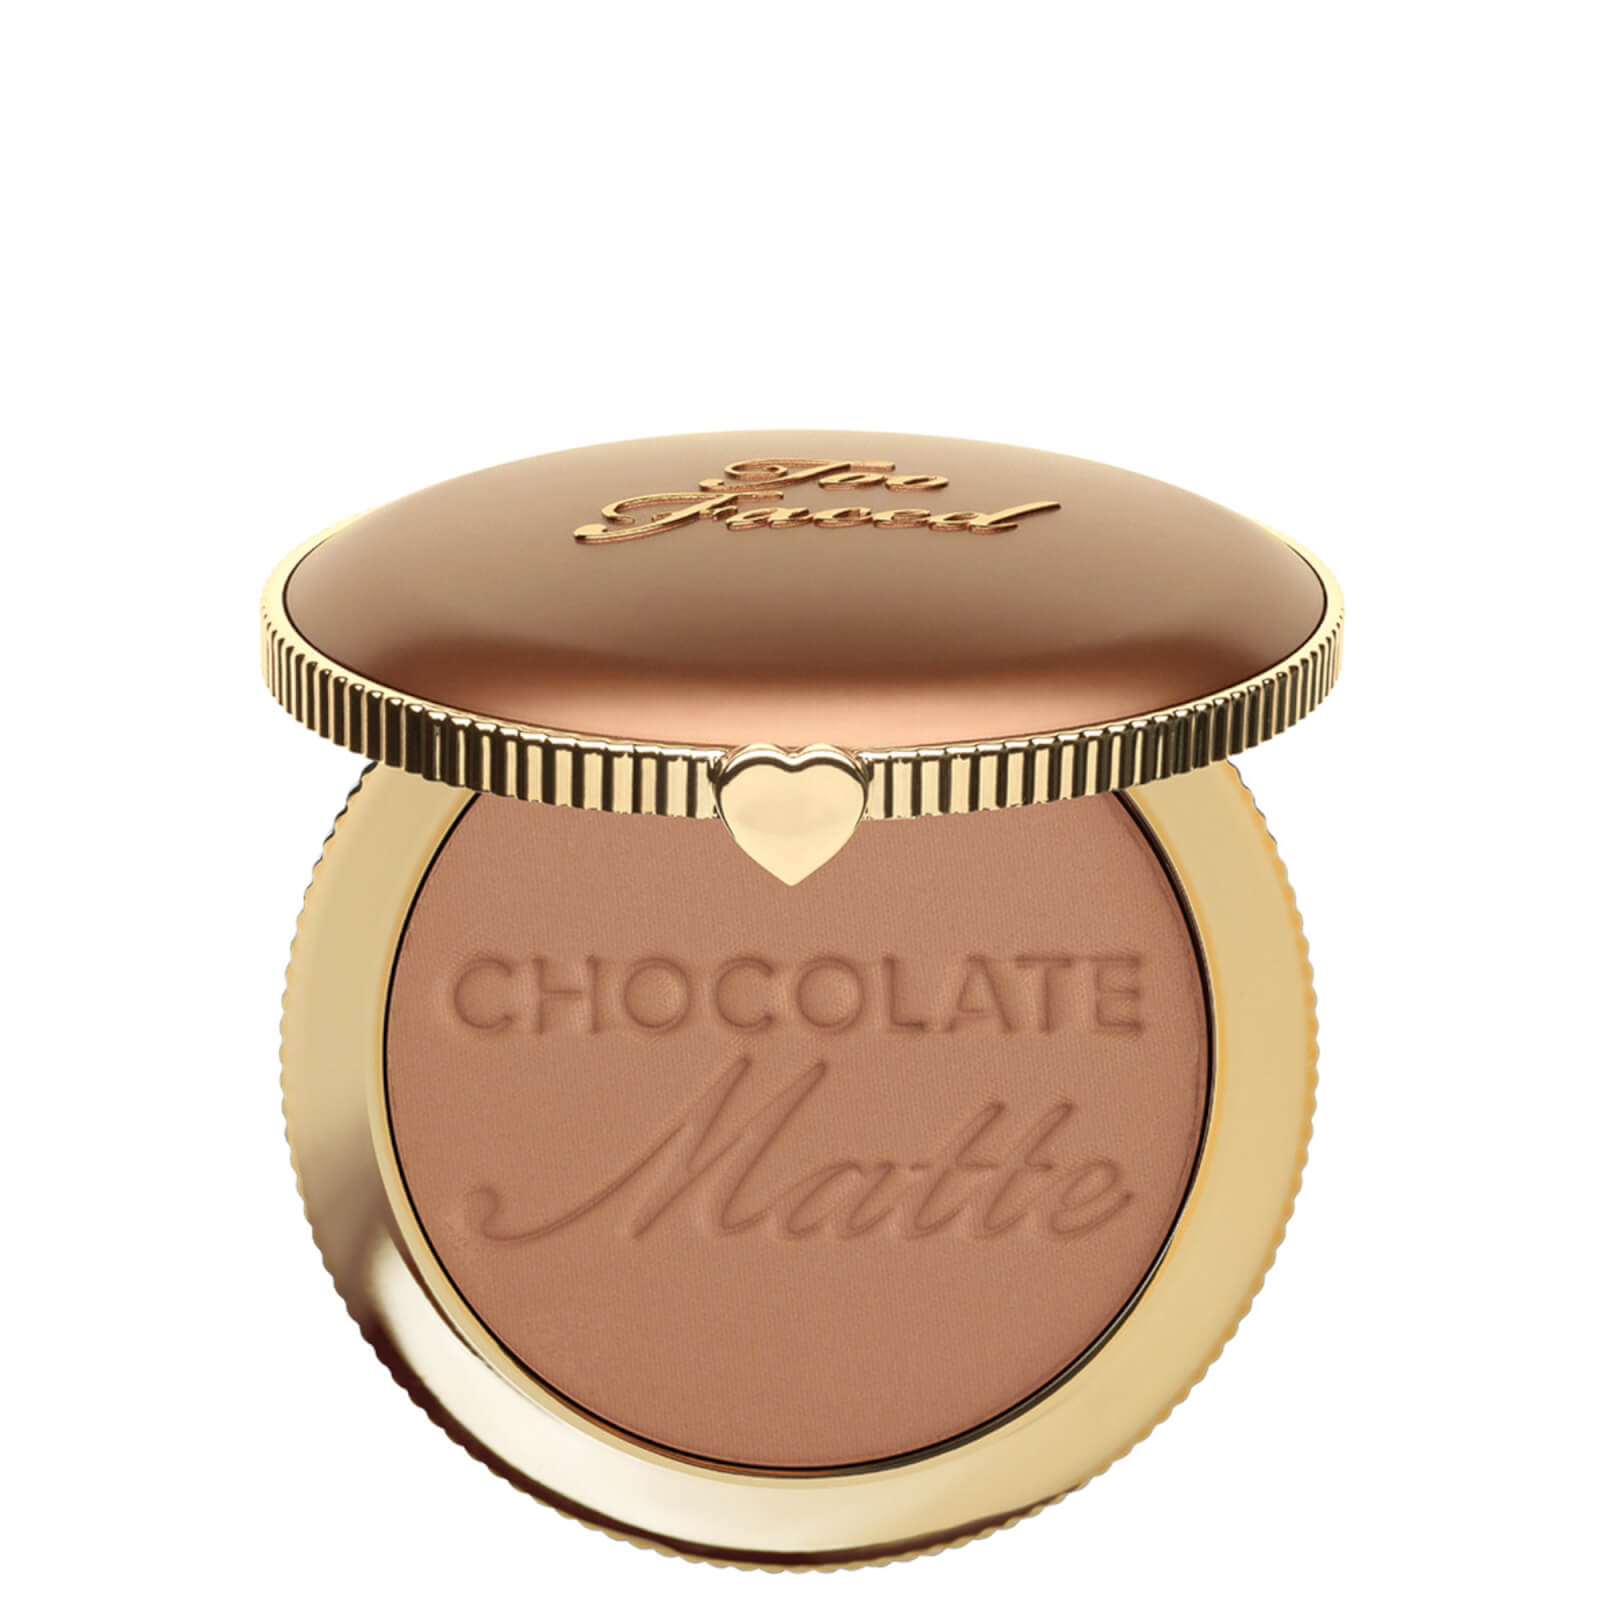 Image of Too Faced Soleil Bronzer - Chocolate 8g